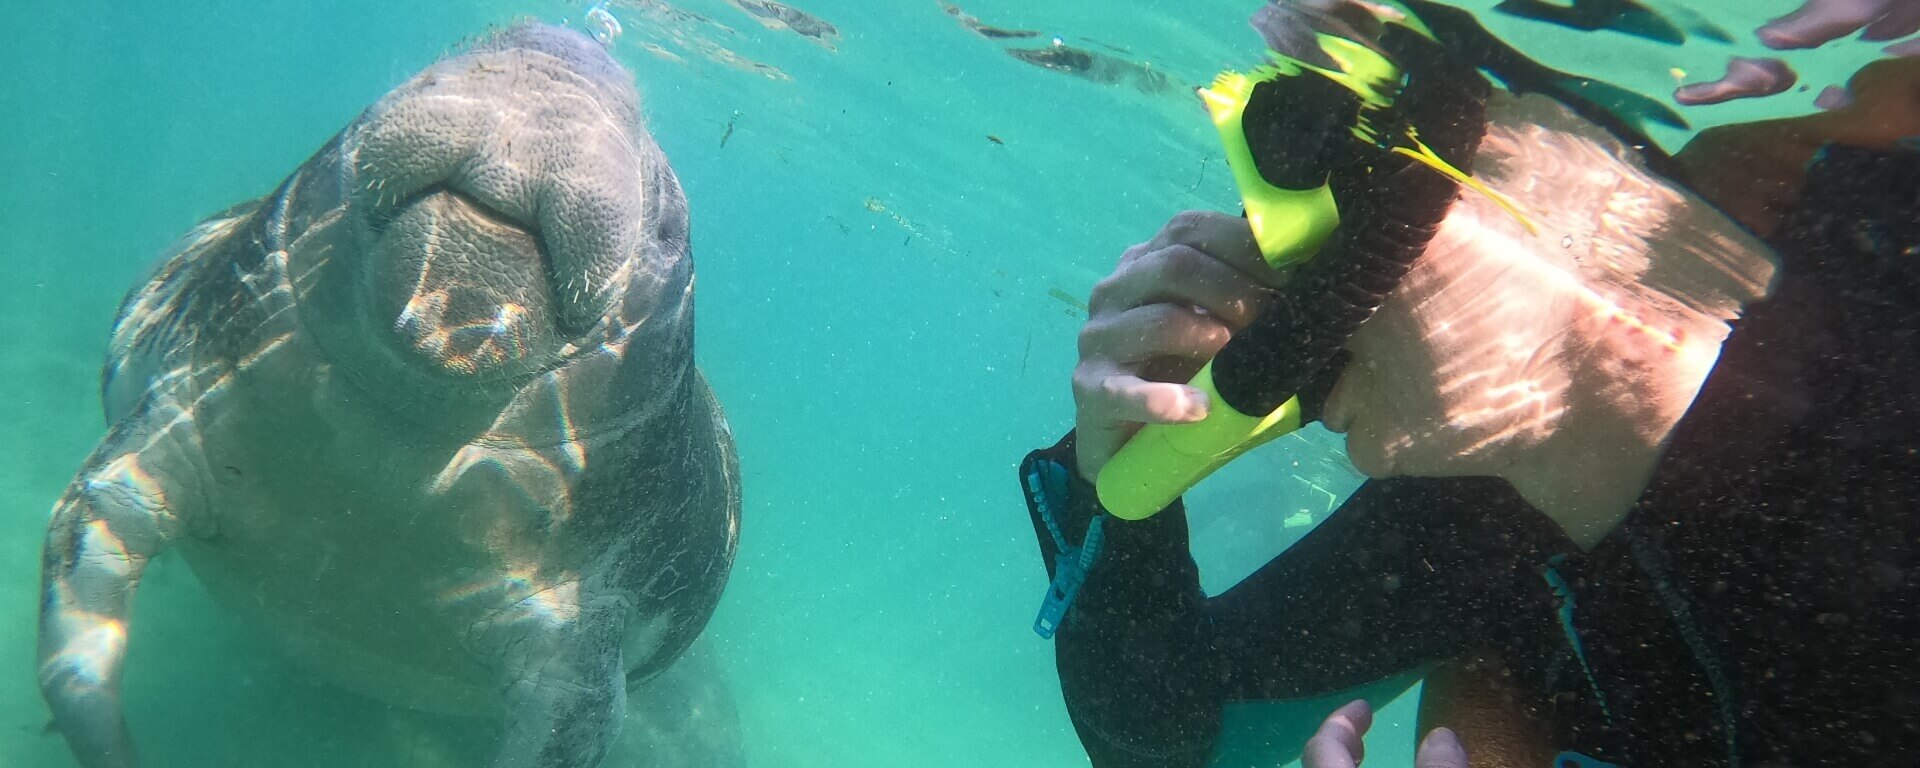 A person that is snorkeling beside a manatee adjusts their snorkel gear in Crystal River, Florida